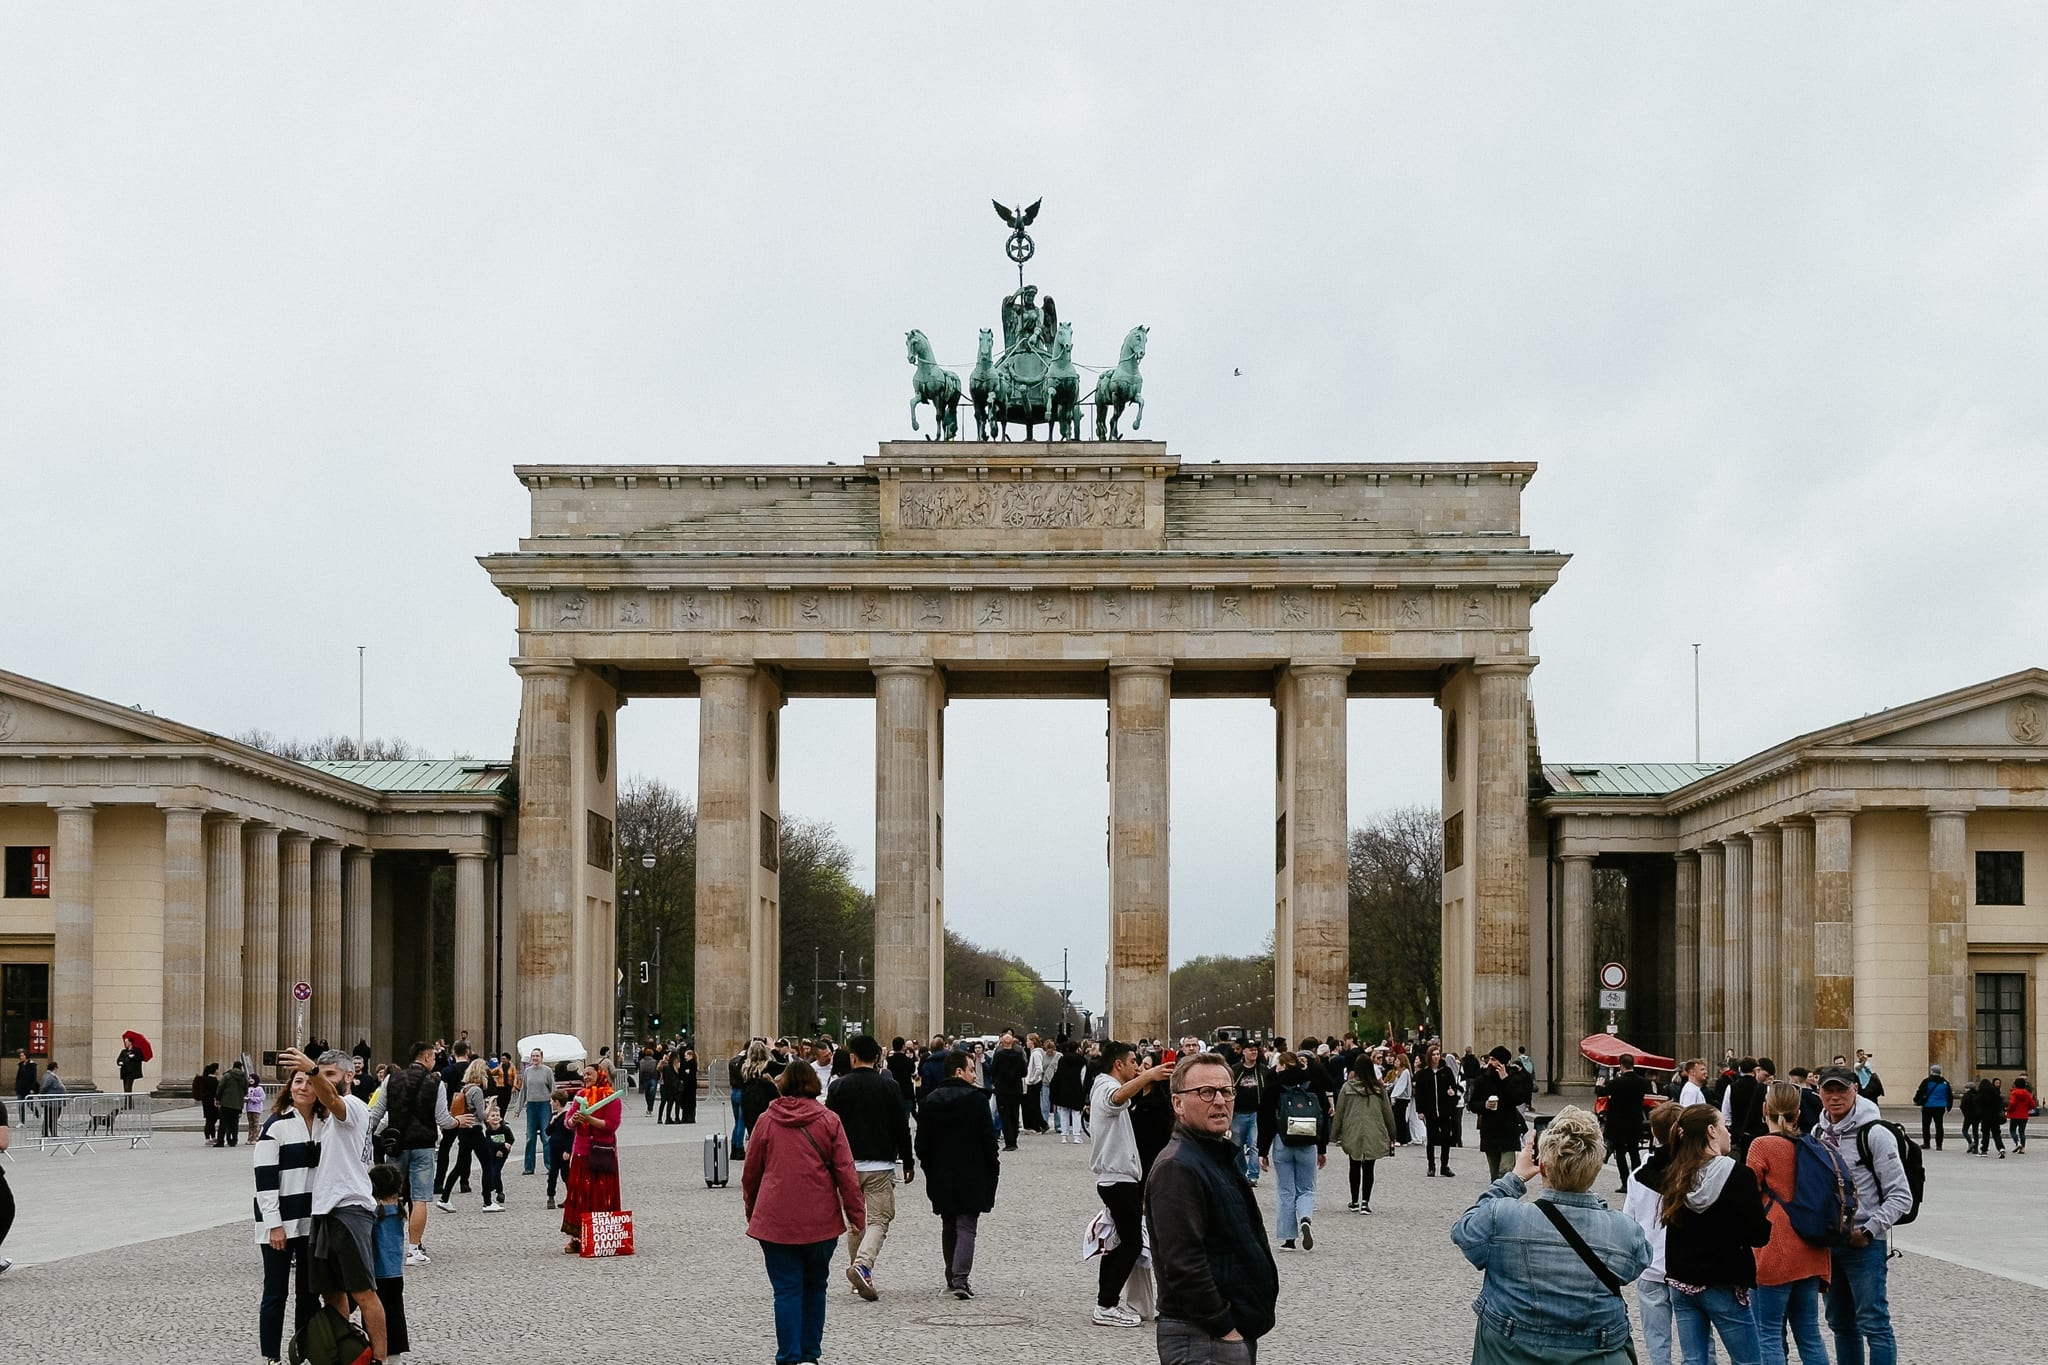 Brandenburg Gate, an 18th century monument, during the day surrounded by a large crowd of tourists